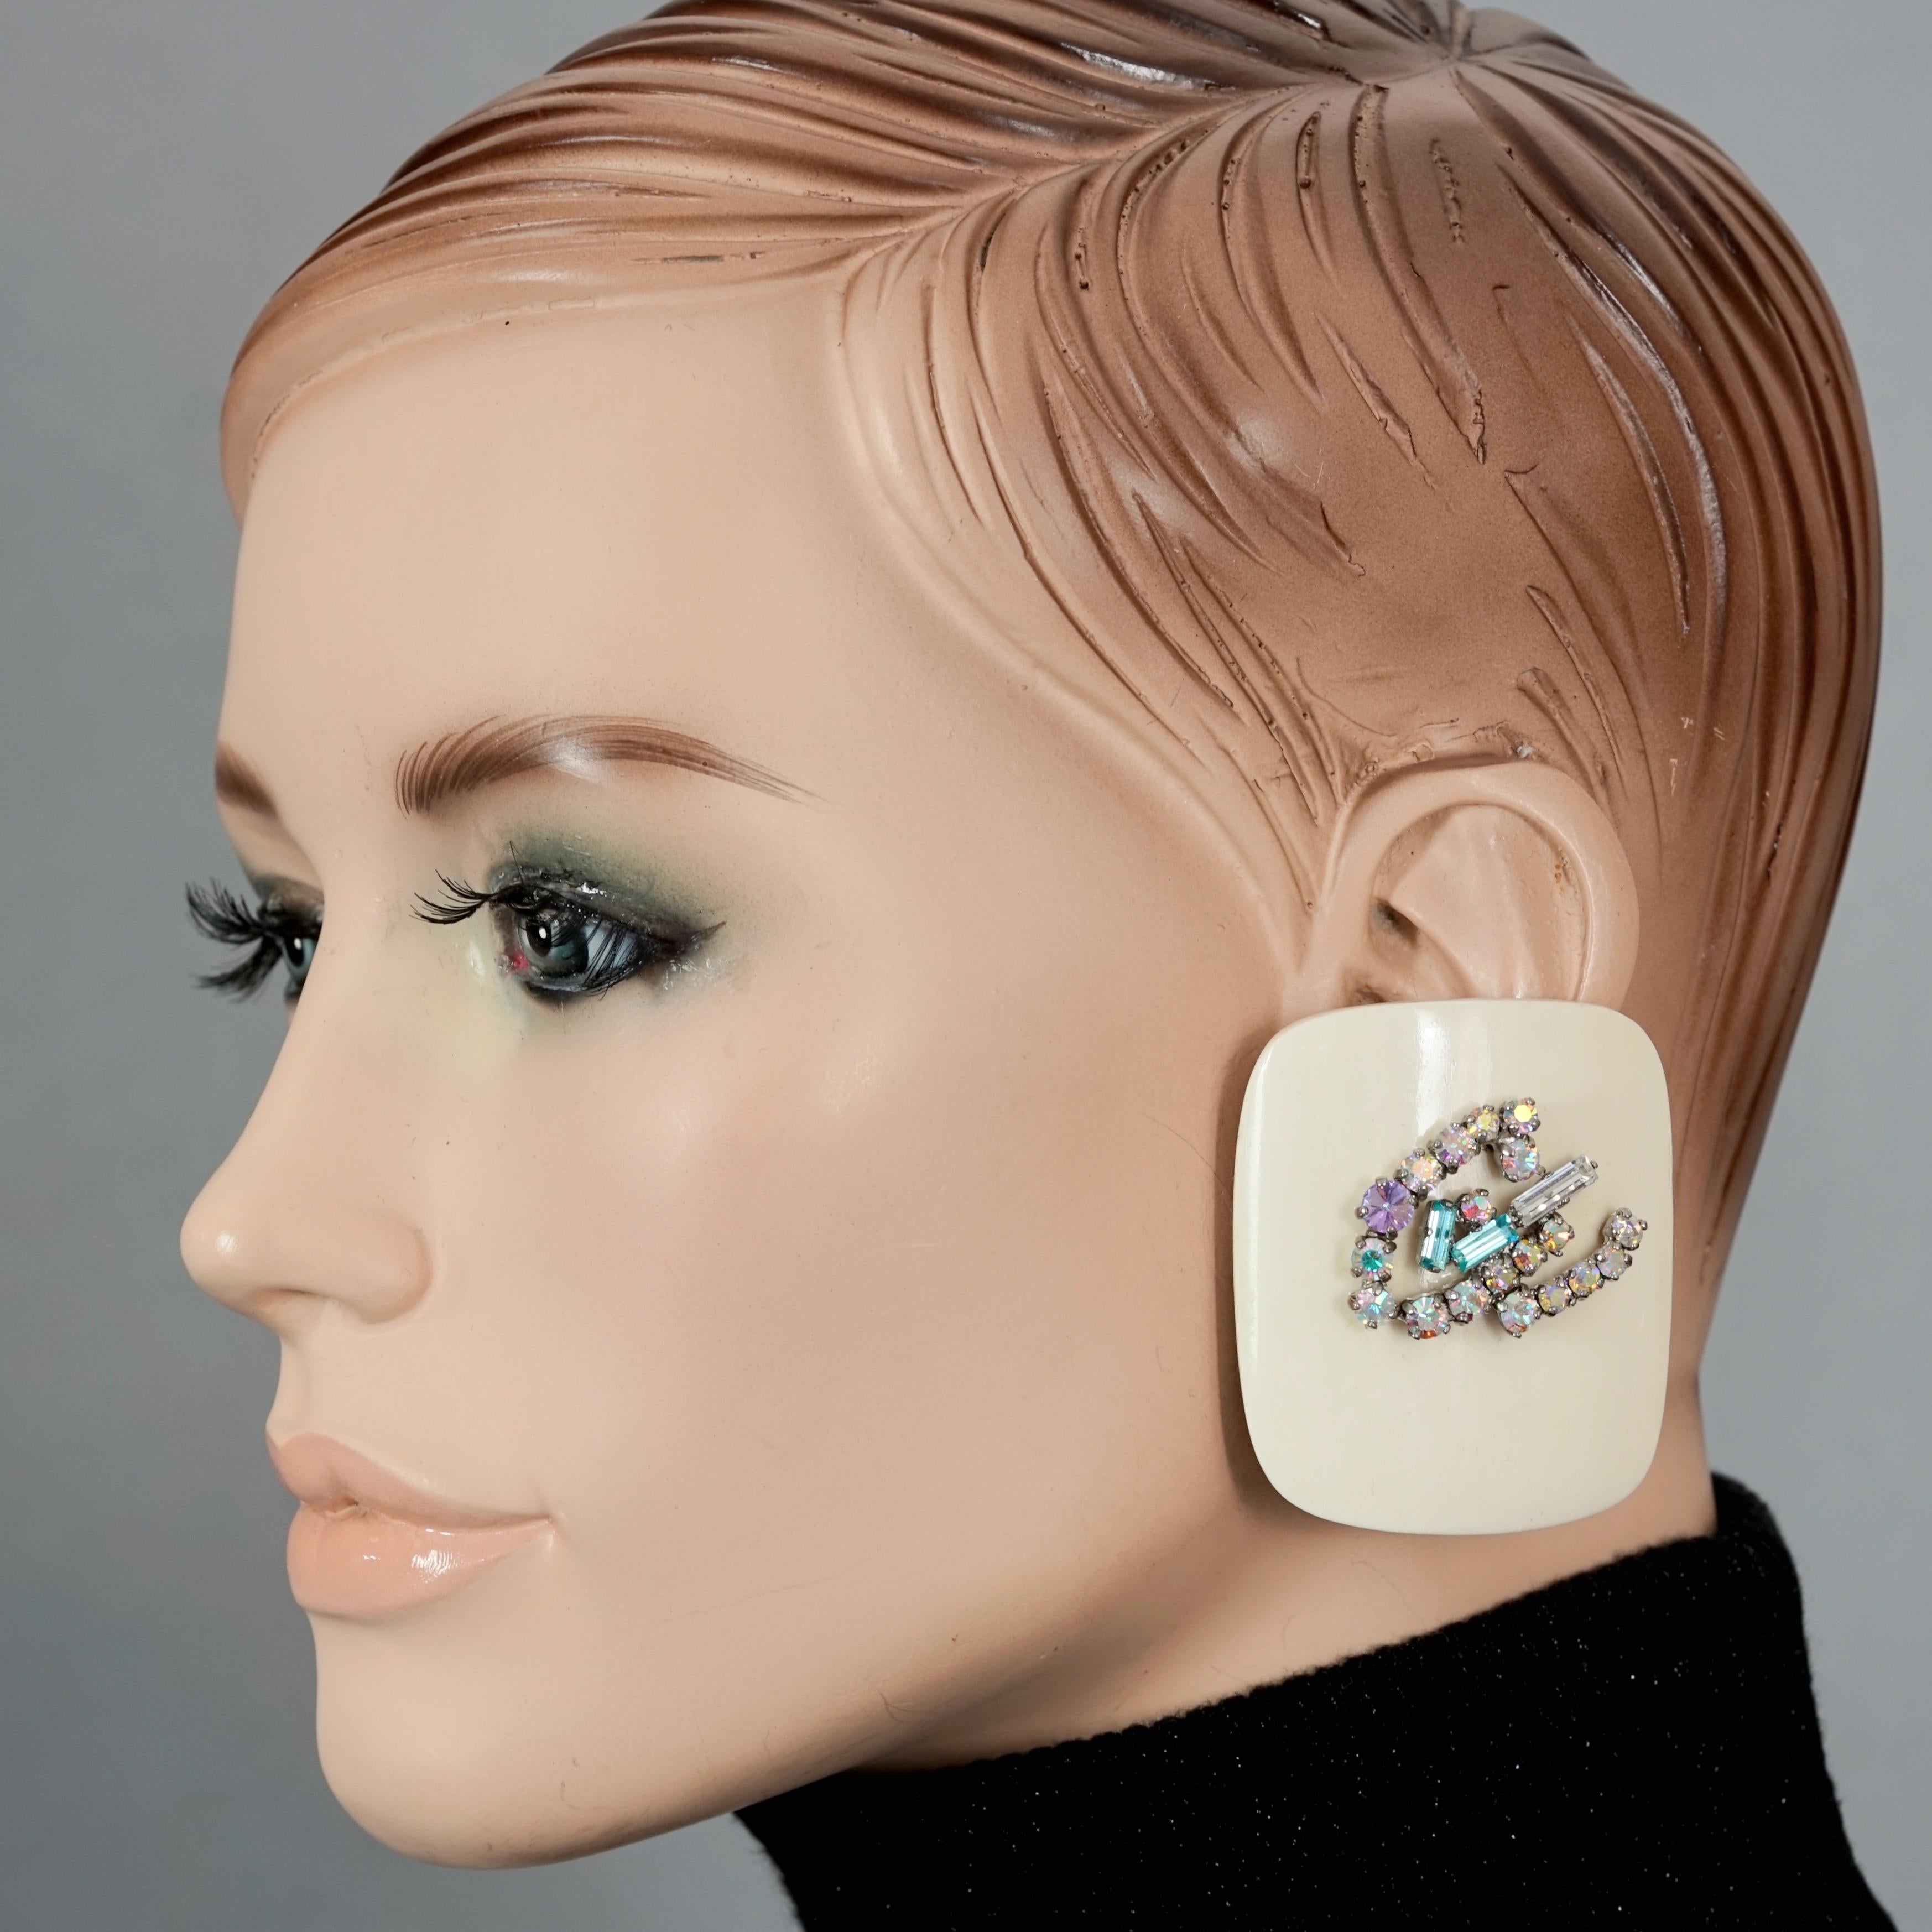 Vintage Massive CHRISTIAN LACROIX Logo Rhinestone Resin Ivory Earrings

Measurements:
Height: 2.20 inches (5.6 cm)
Width: 1.85 inches (4.7 cm)
Weight per Earring: 32 grams

Features:
- 100% Authentic CHRISTIAN LACROIX.
- Massive square white ivory